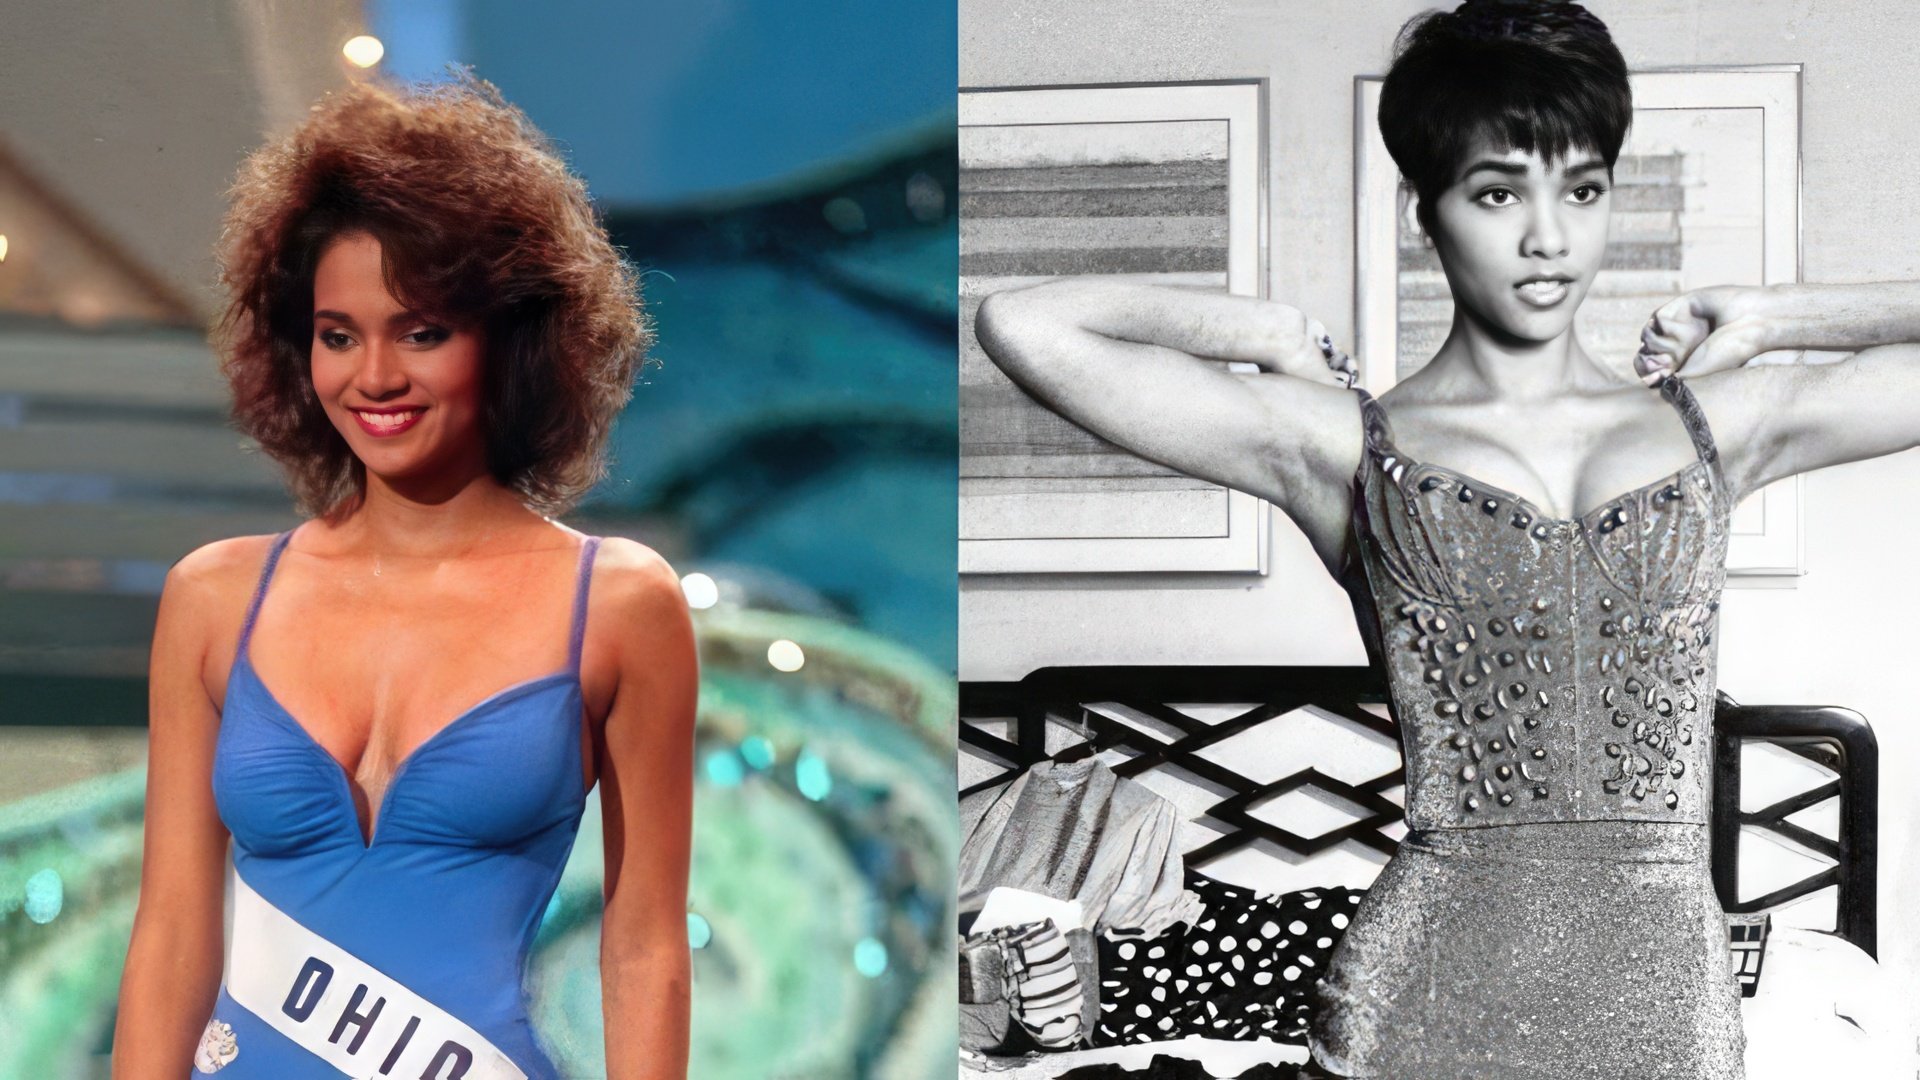 The beginning of the '80s was marked by Berry's participation in beauty pageants